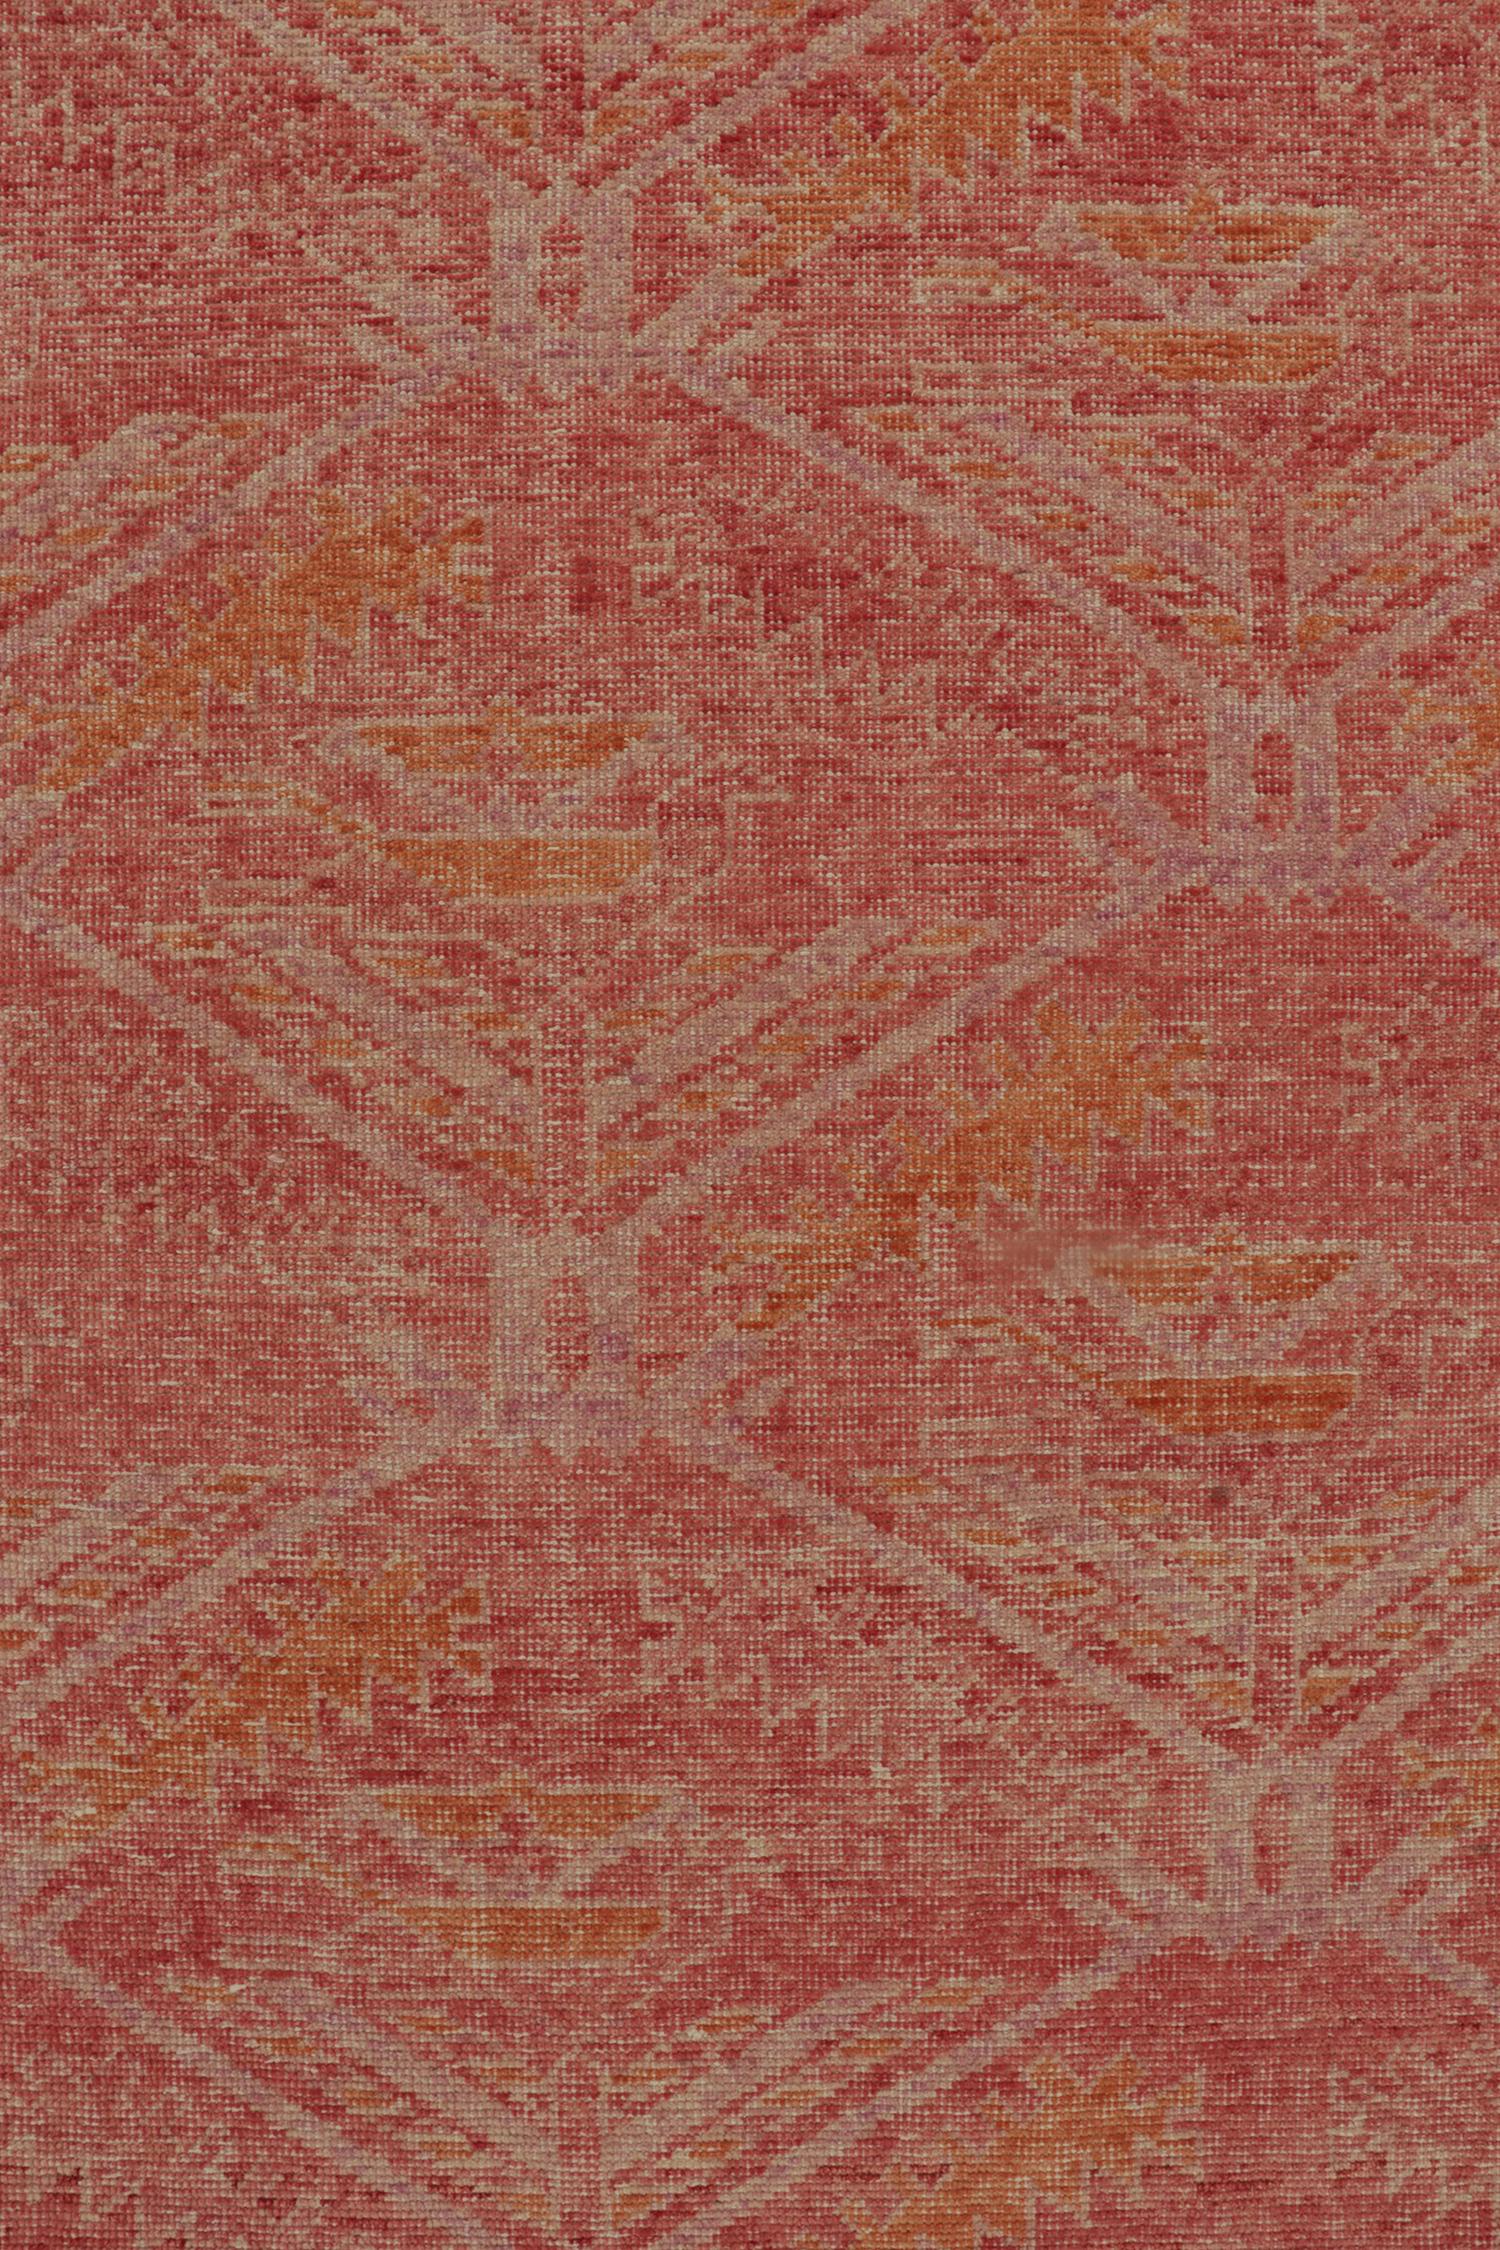 Rug & Kilim’s Distressed Kuba Style Rug in Red with Orange Tribal Patterns In New Condition For Sale In Long Island City, NY